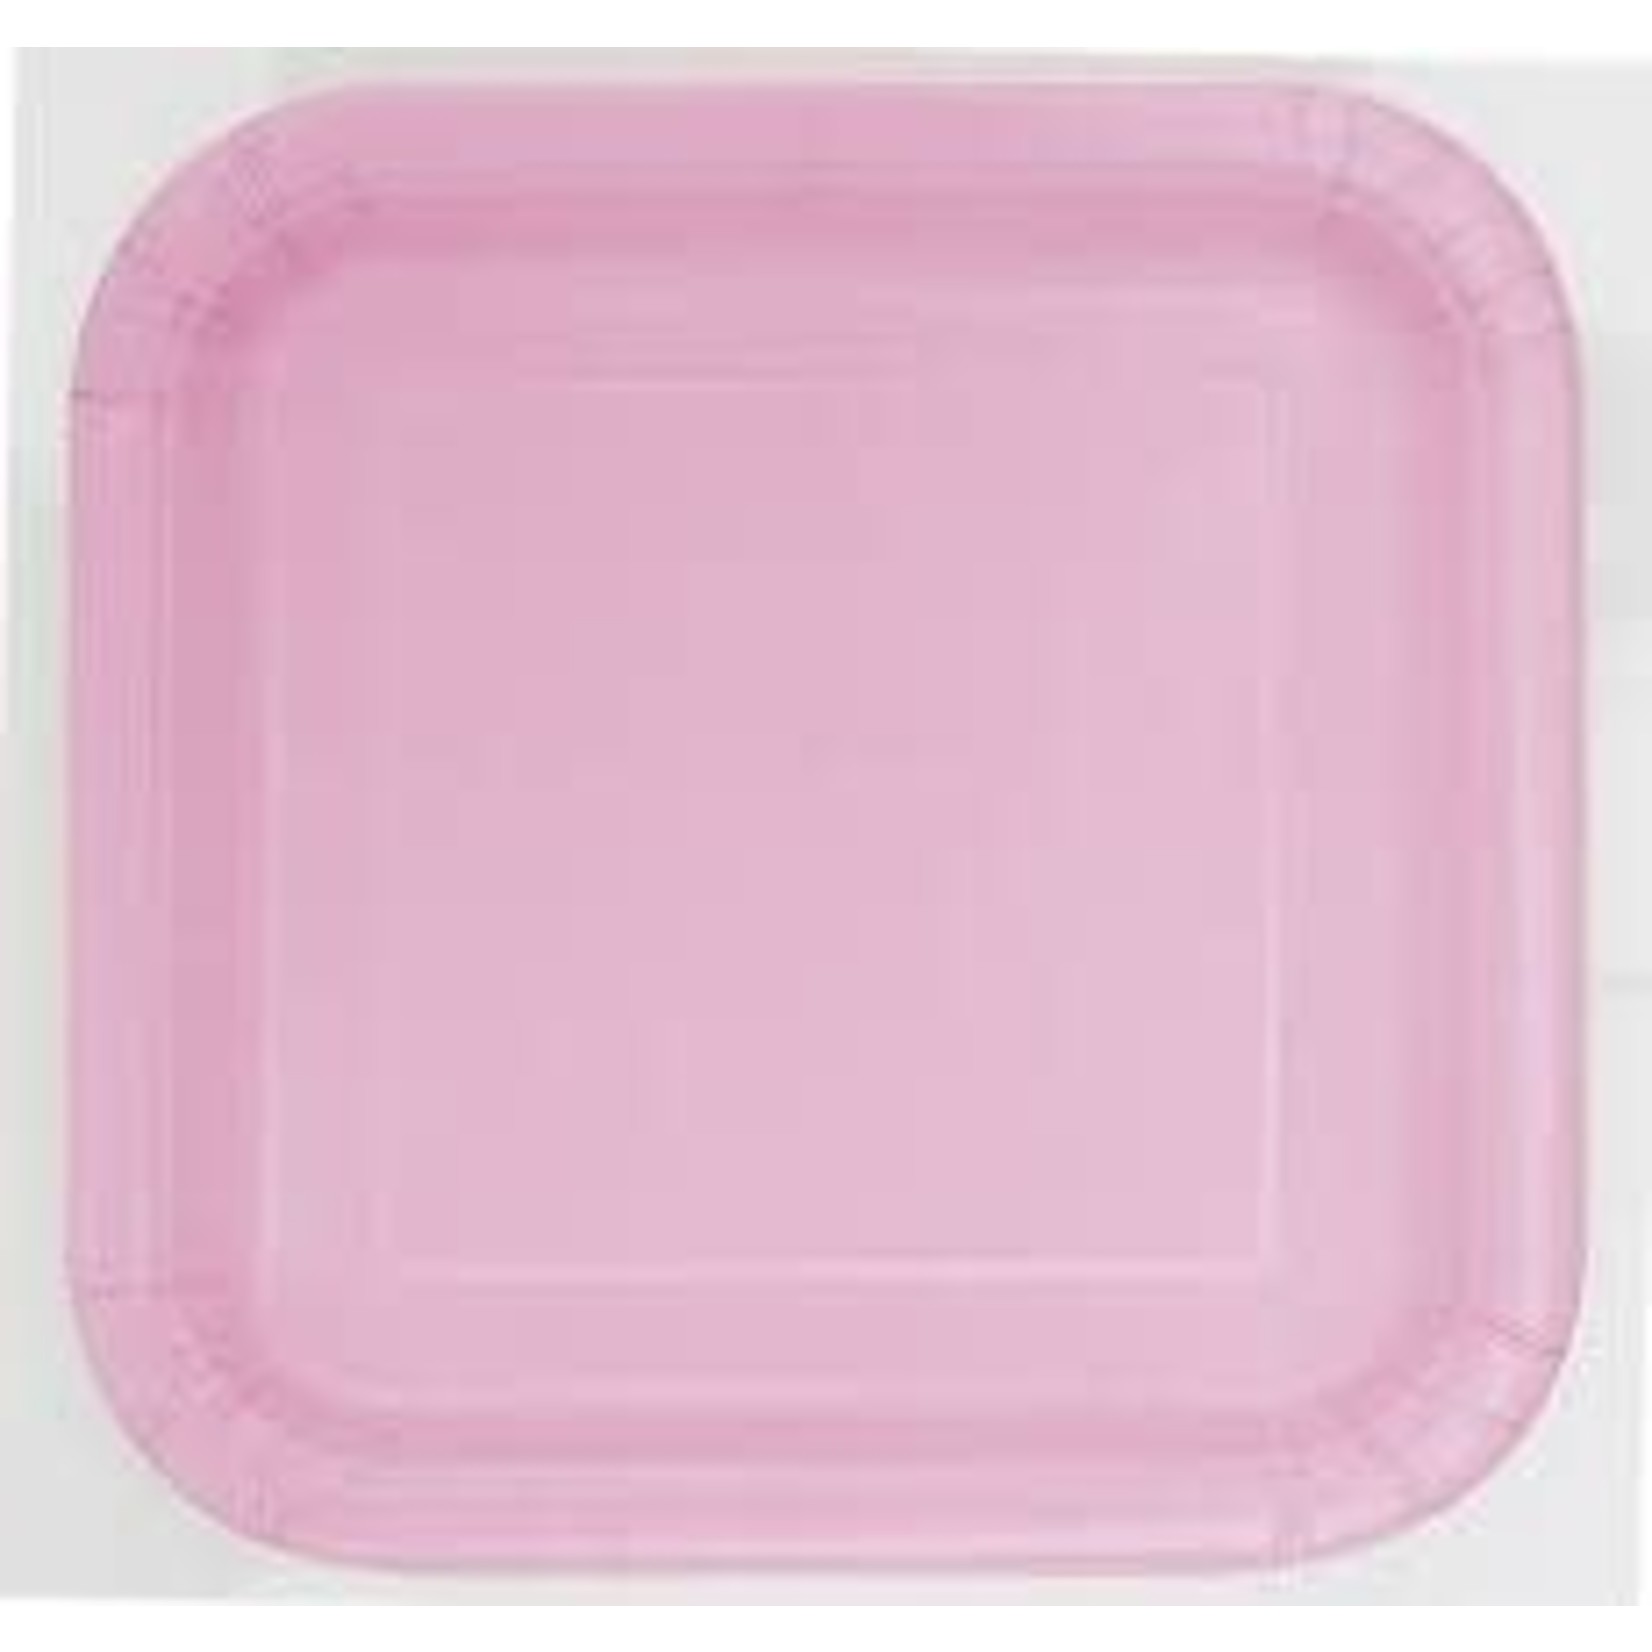 Lovely Pink Squared Cake Plates 16ct